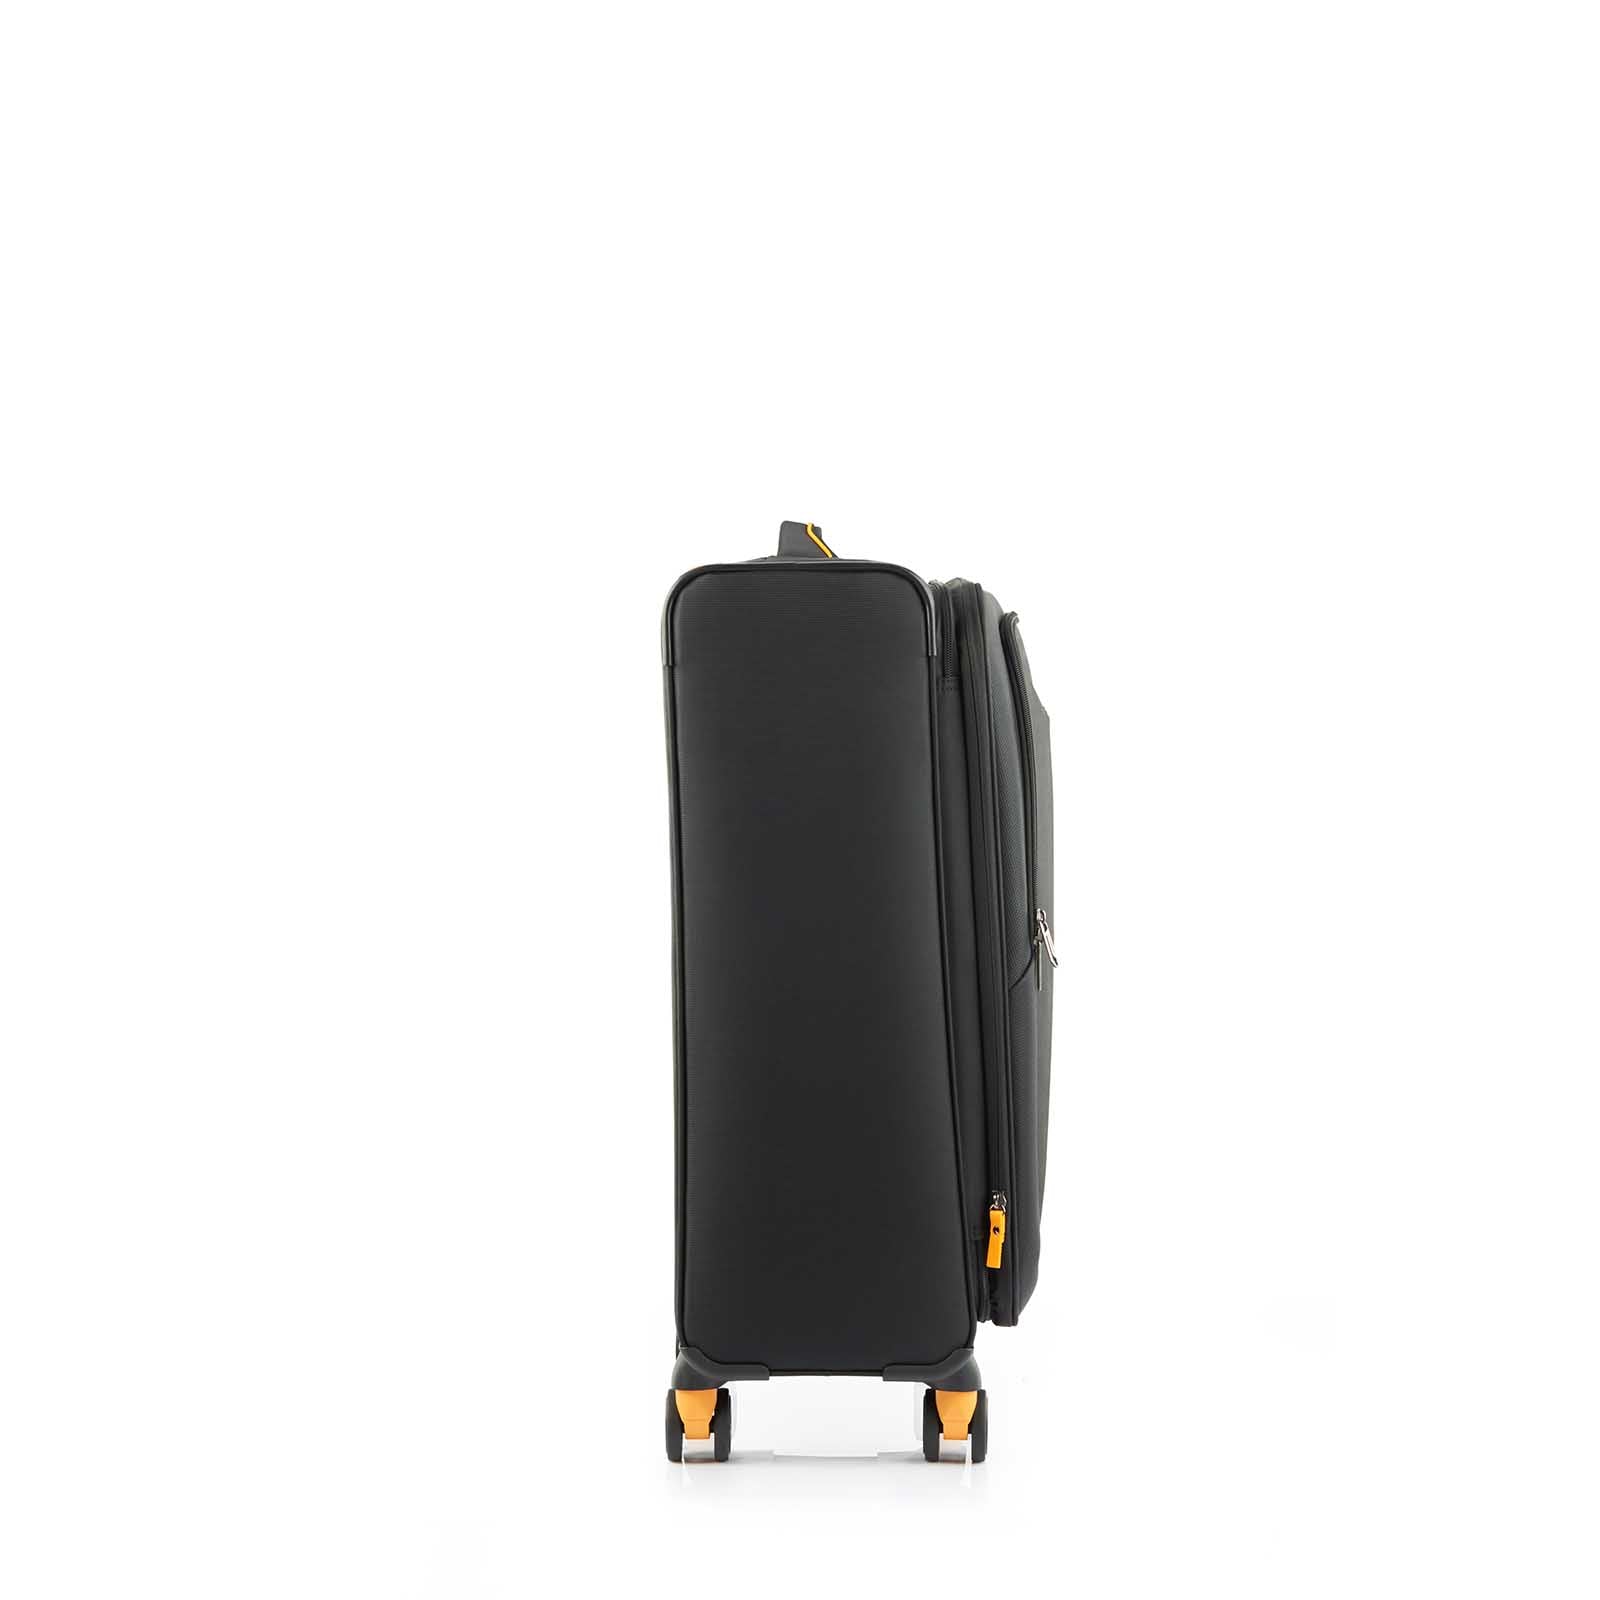 American-Tourister-Applite-4-Eco-71cm-Suitcase-Black-Mustard-Side-Angle